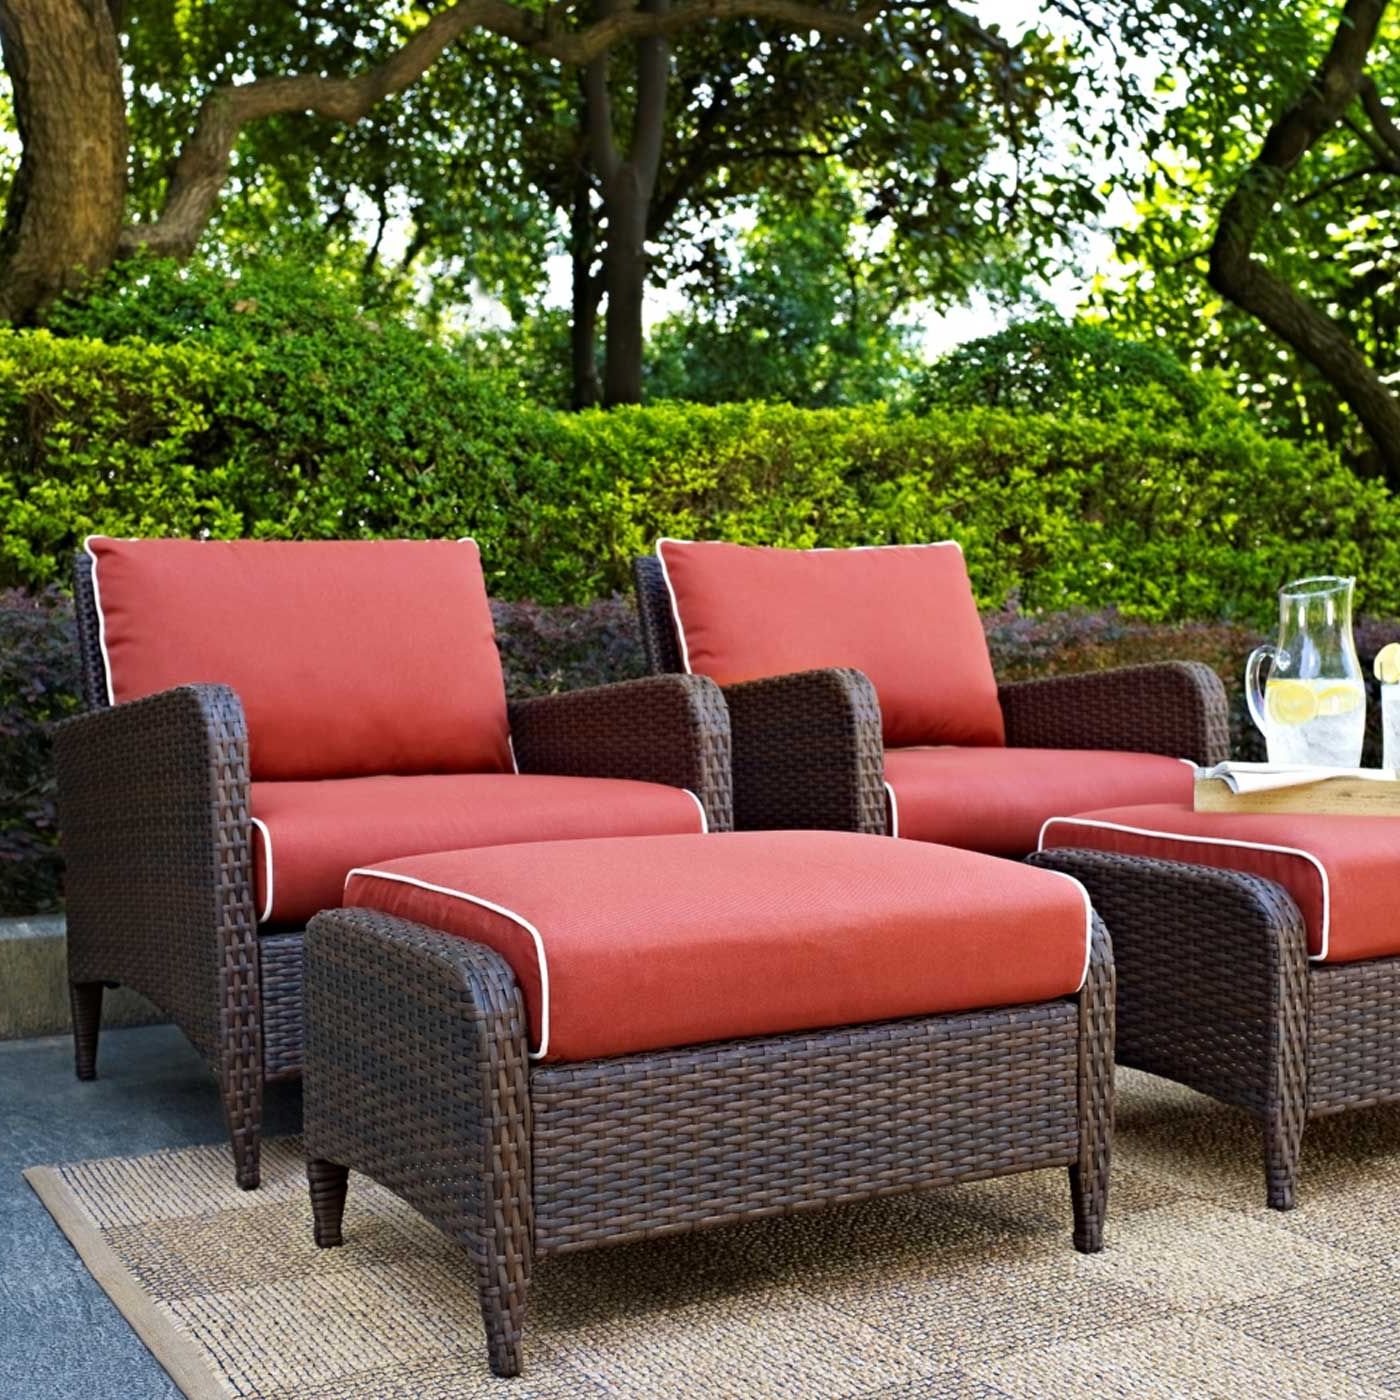 Current 4 Piece Outdoor Seating Patio Sets For Crosley Kiawah 4 Piece Outdoor Wicker Seating Set With Sangria Cushions (View 3 of 15)